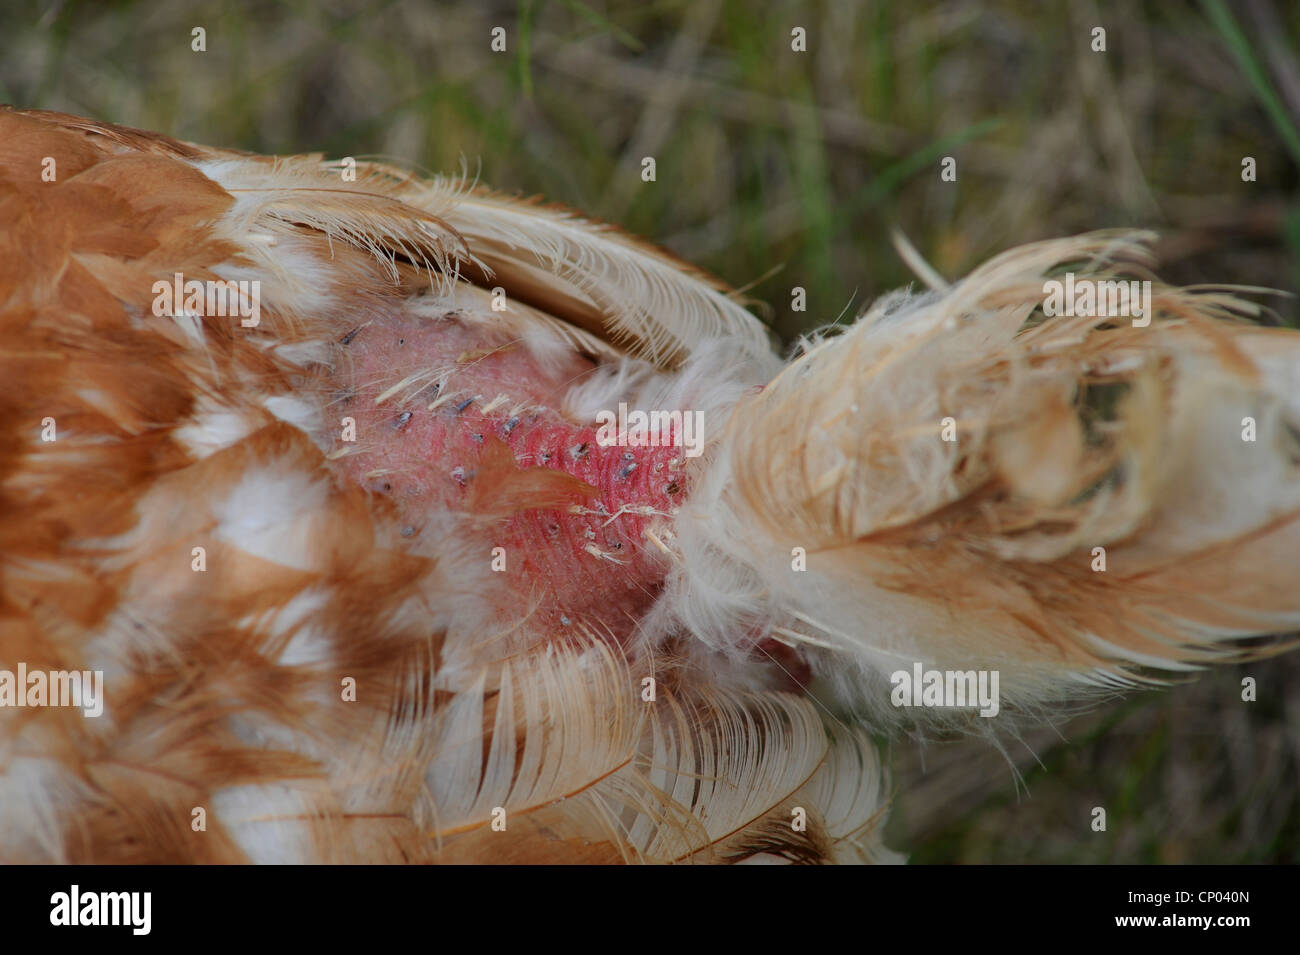 domestic fowl (Gallus gallus f. domestica), with plucked feathers in a meadow, Germany, Stock Photo